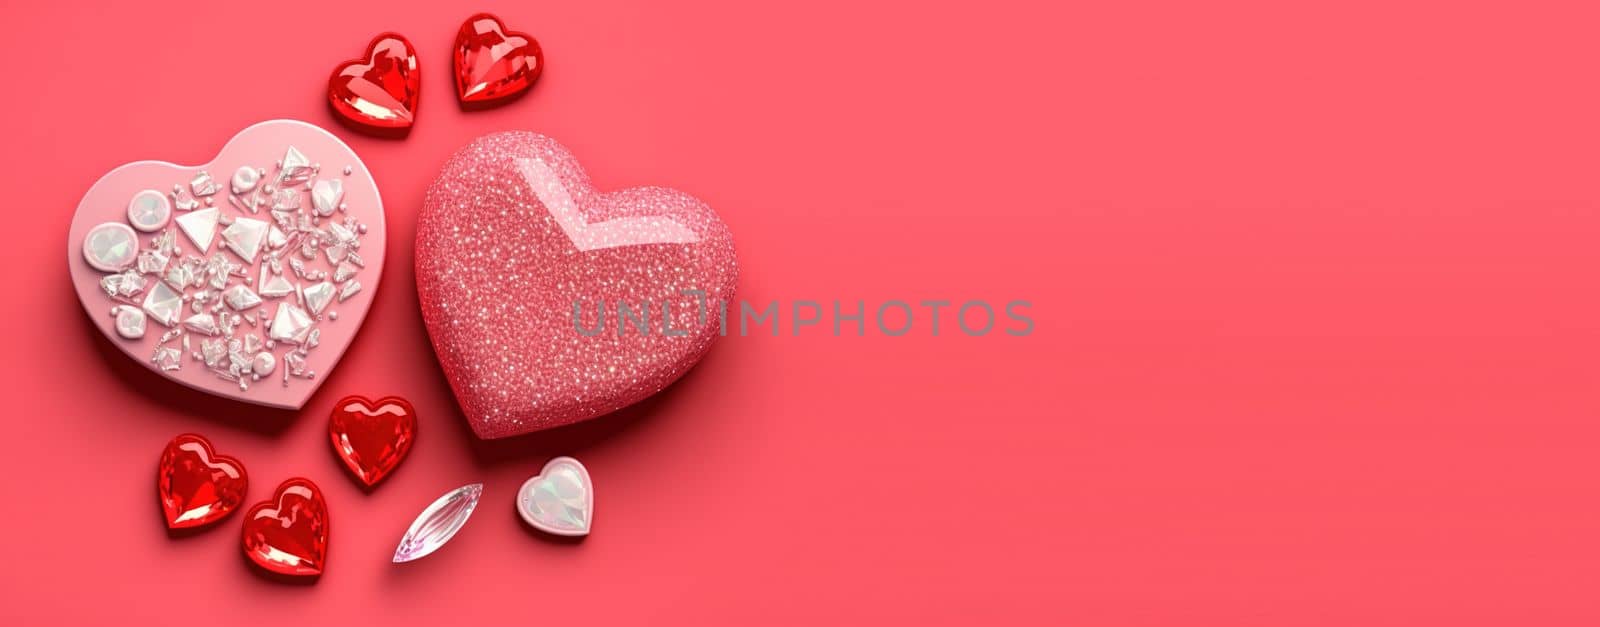 Valentine's Day 3D Heart Illustration and Crystal Diamond Banner and Background